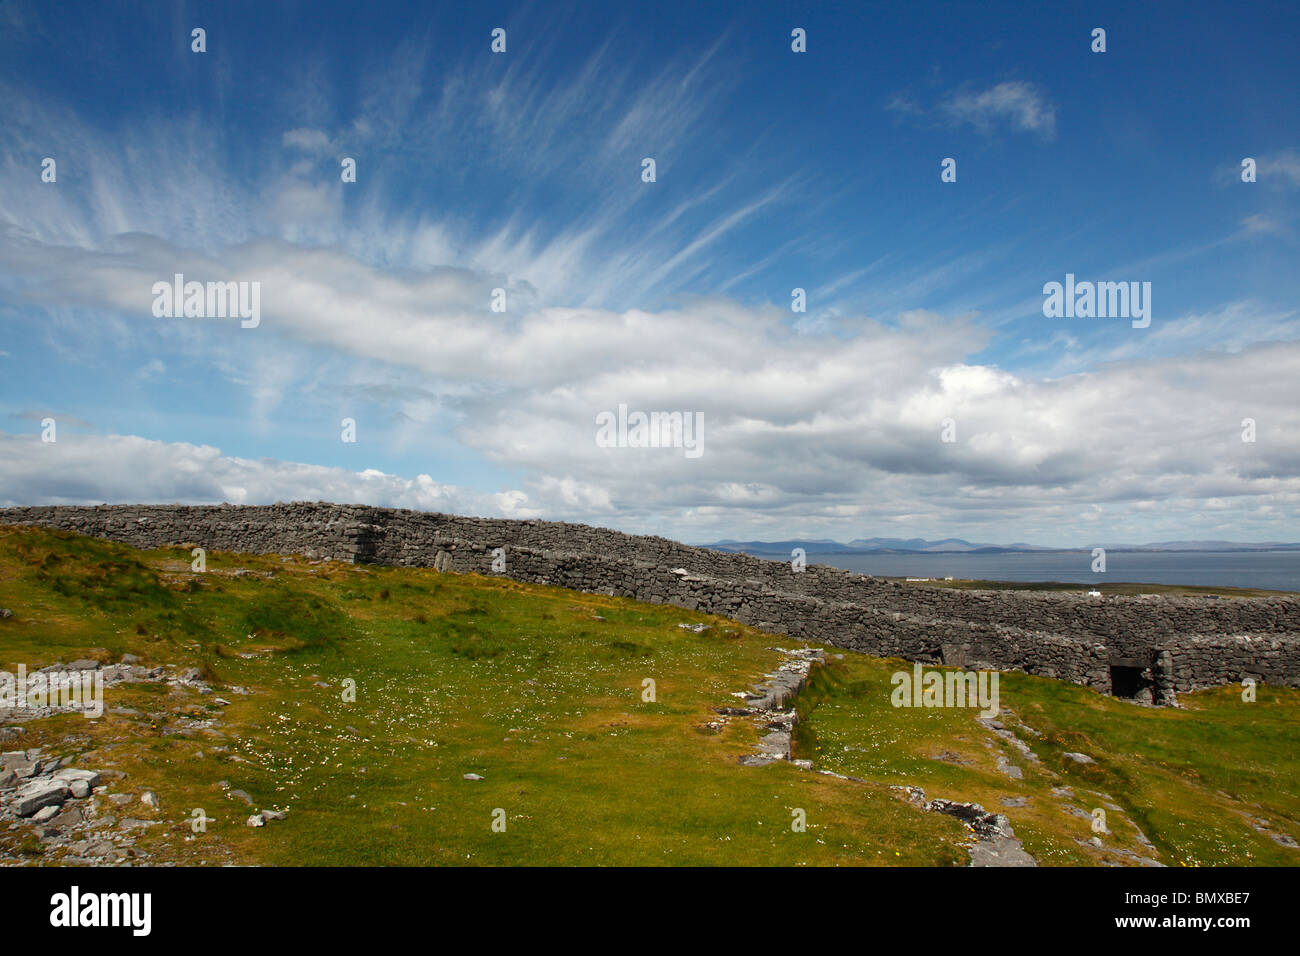 Dramatic skies over Dun Aengus fort looking to Connemara from Aranmore,inishmore,Aran isles,Co Galway,western Ireland,Eire. Stock Photo